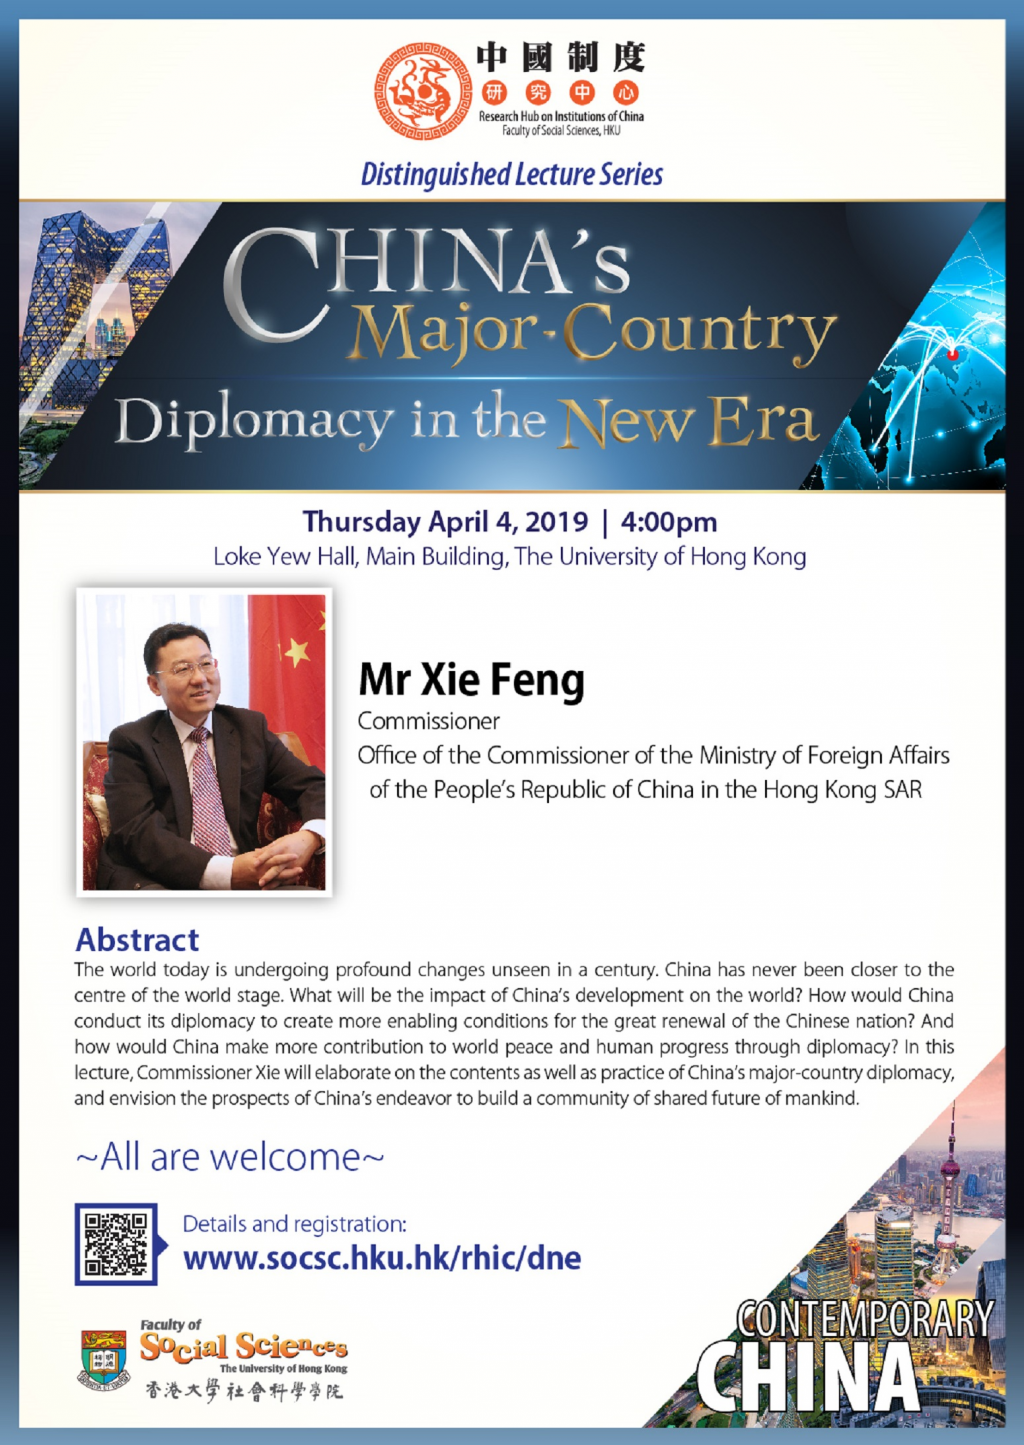 Research Hub on Institutions of China Distinguished Lecture Series - China's Major-Country Diplomacy in the New Era